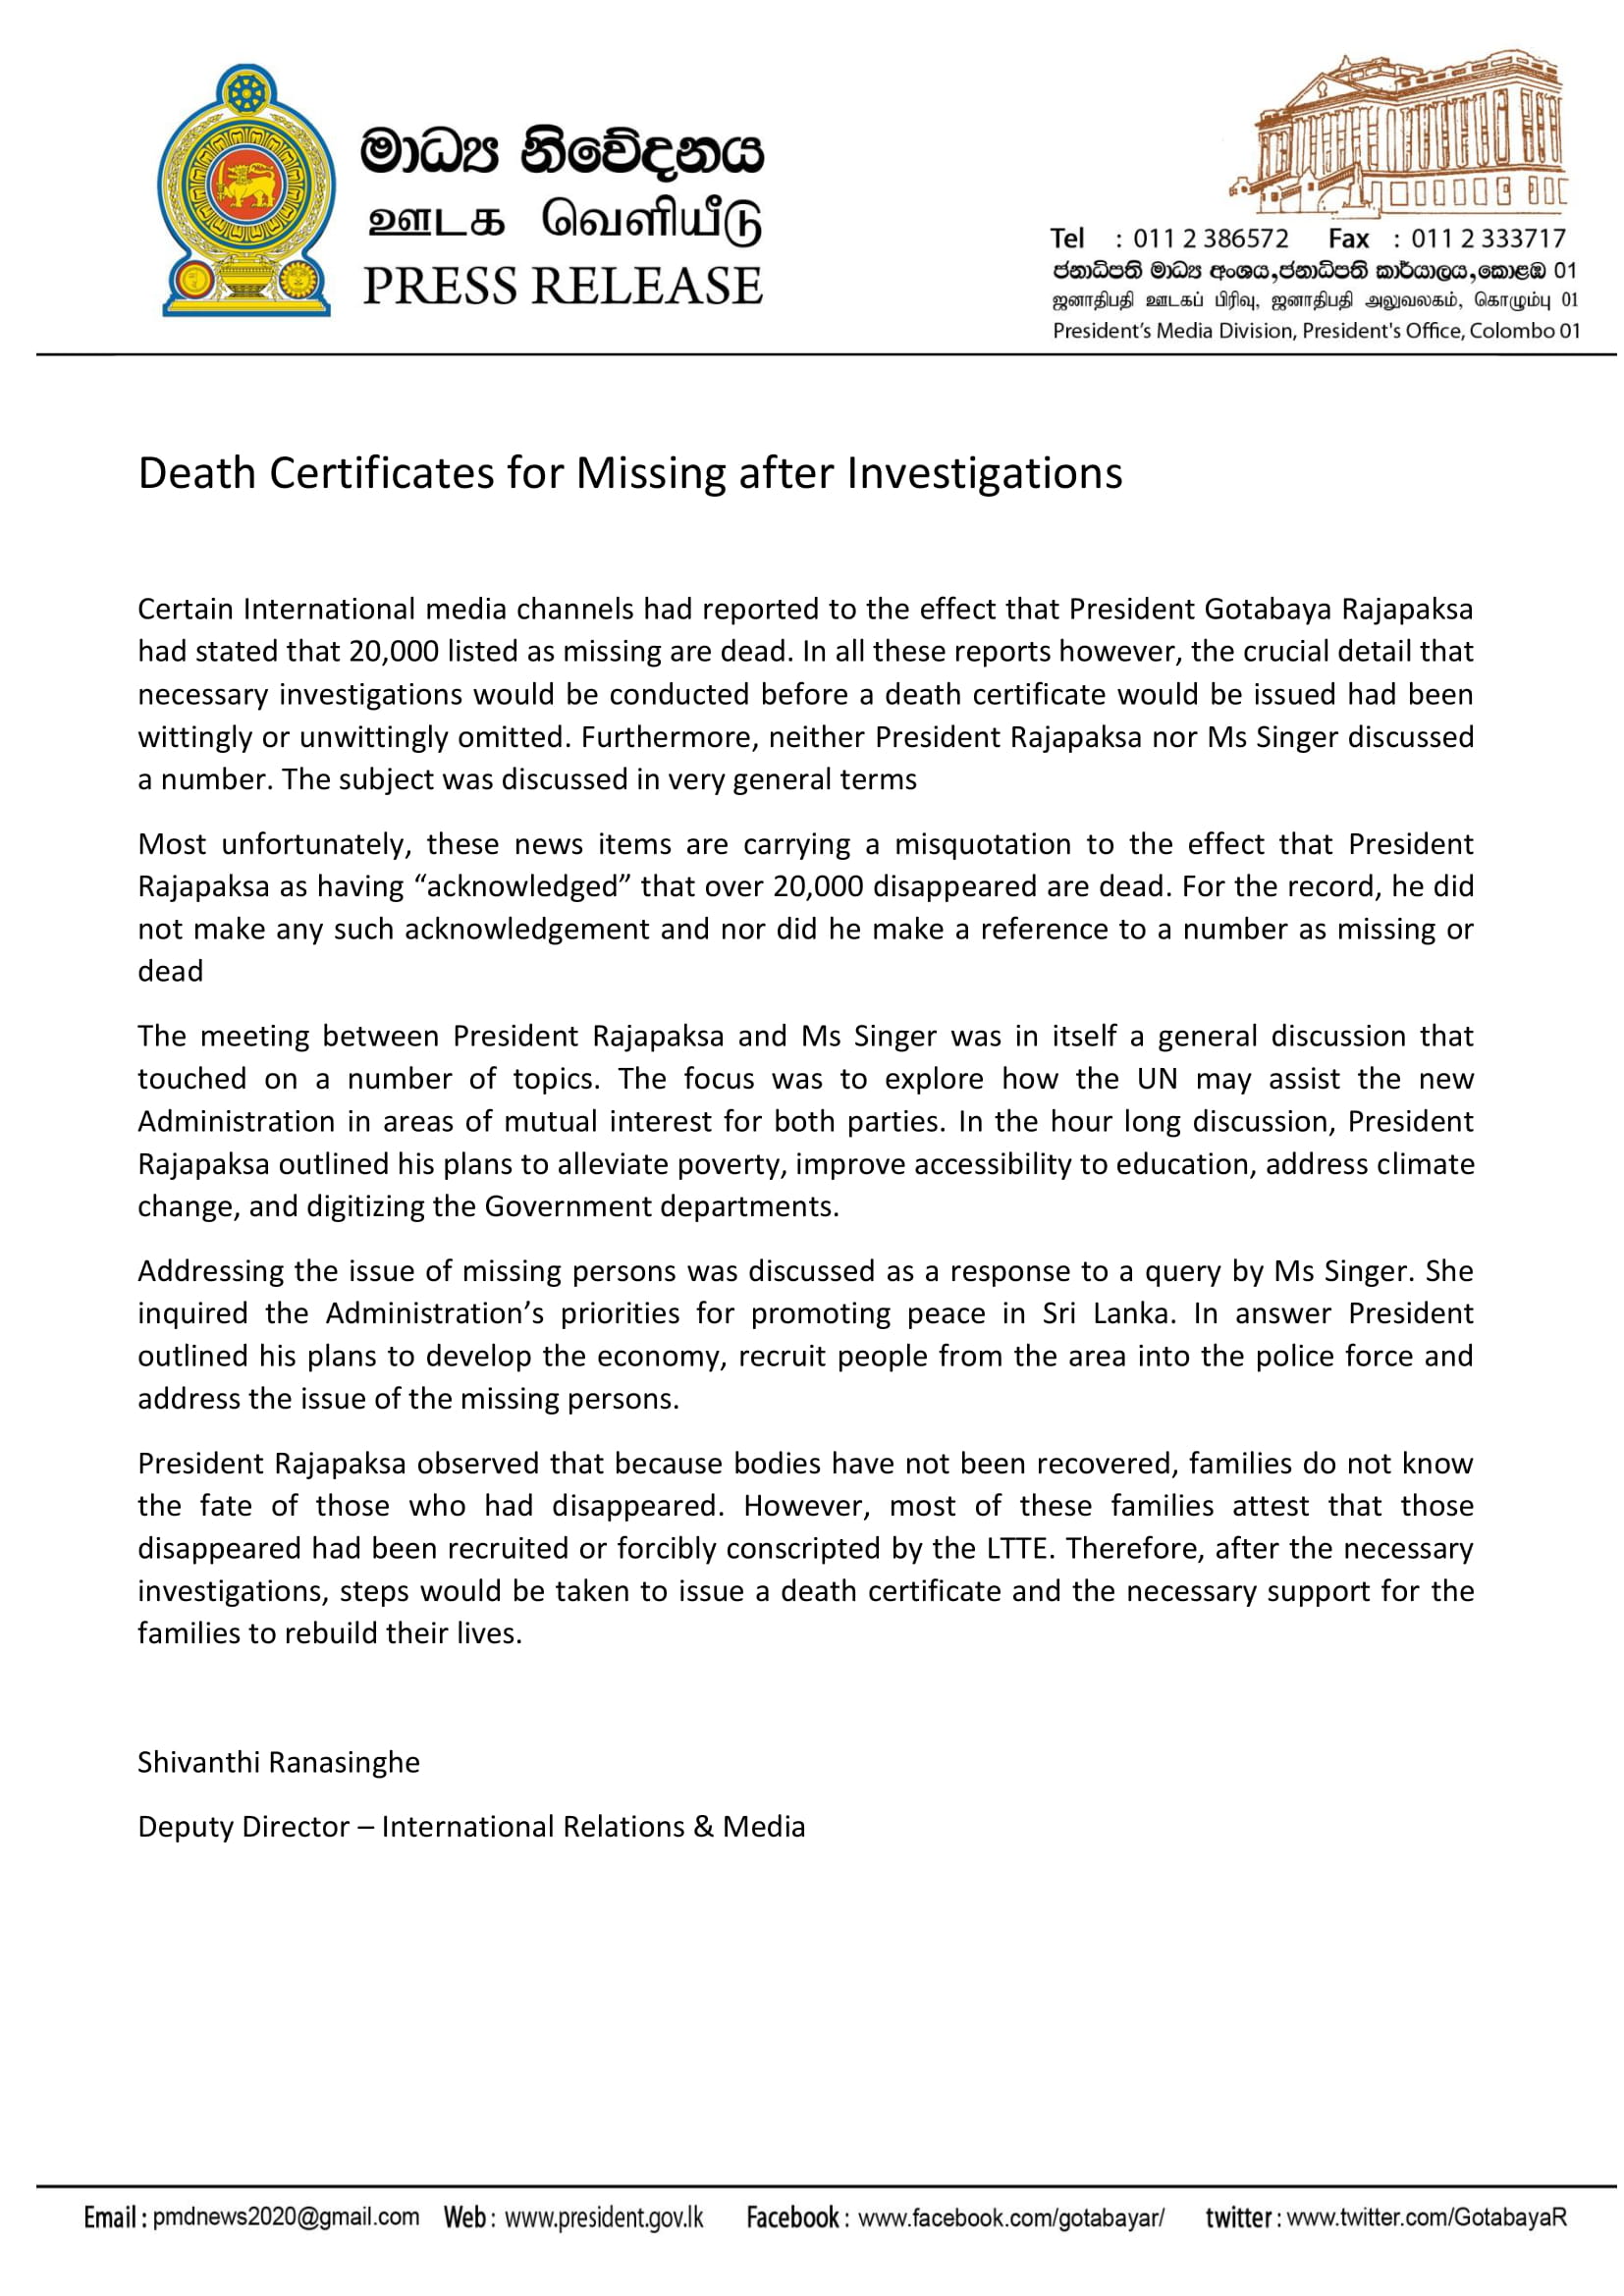 Death Certificates for Missing after Investigations (1)-1